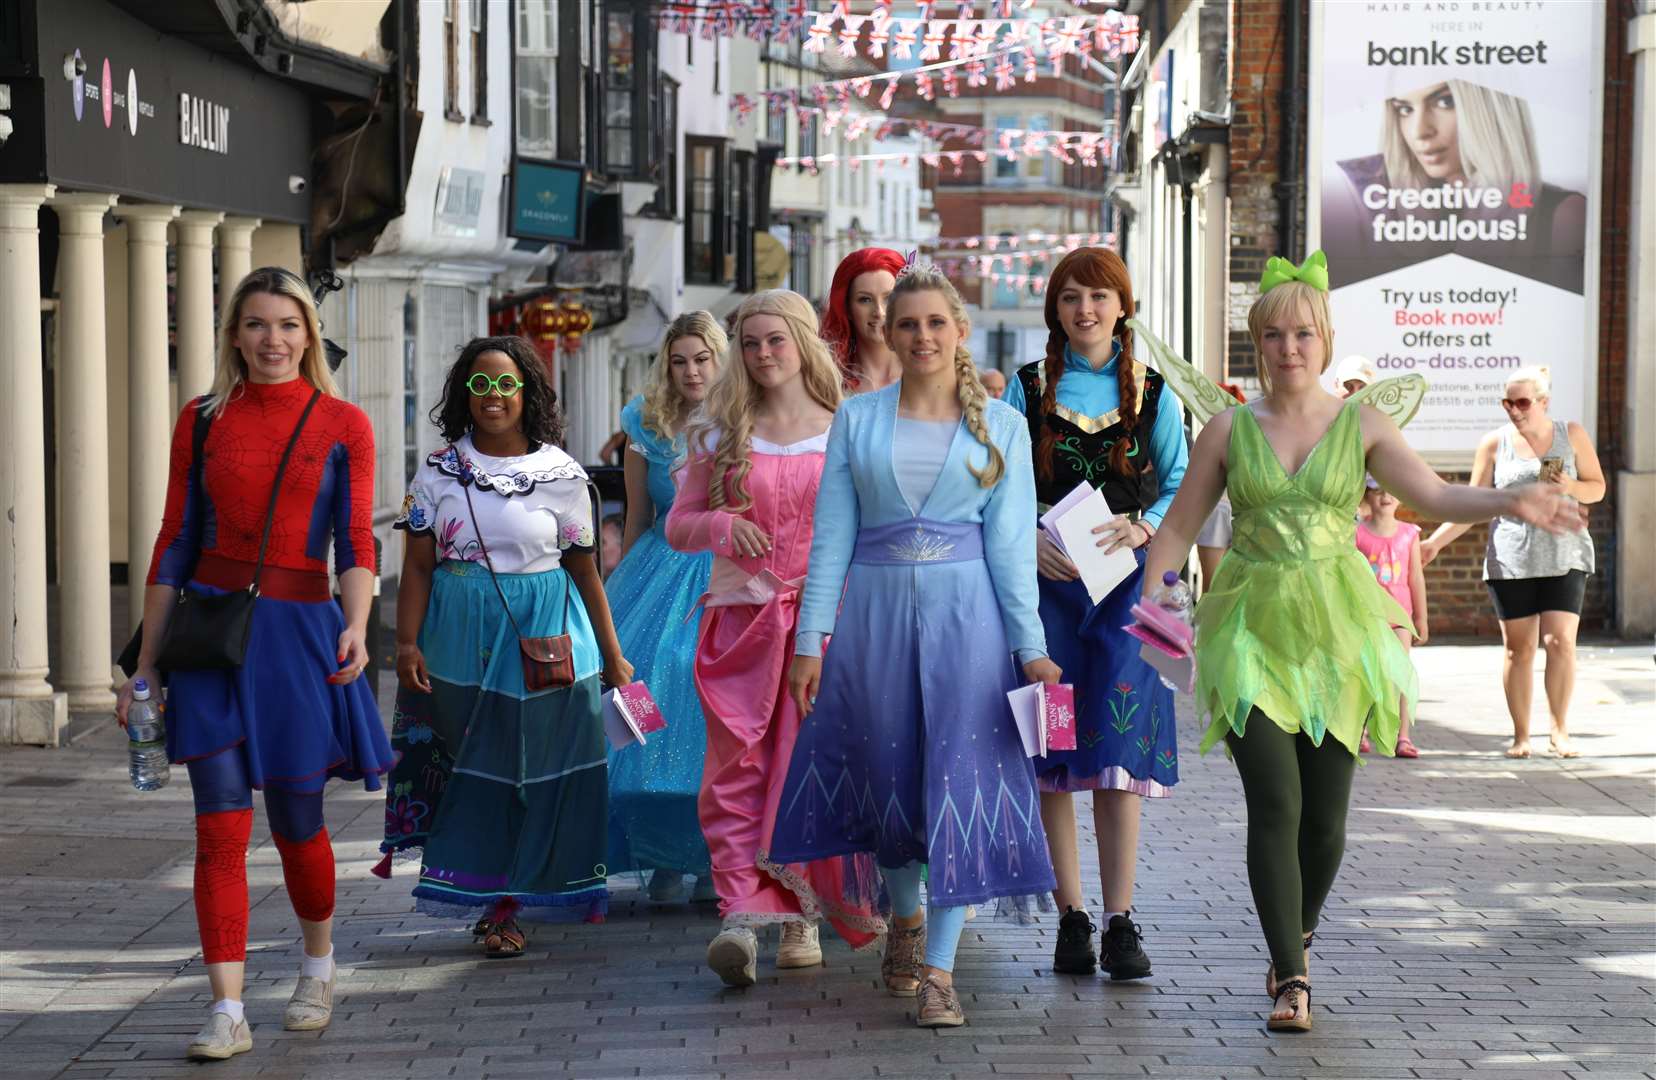 Snow Princess Parties held a free parade through the streets of Maidstone. Picture: Jasmine Morris